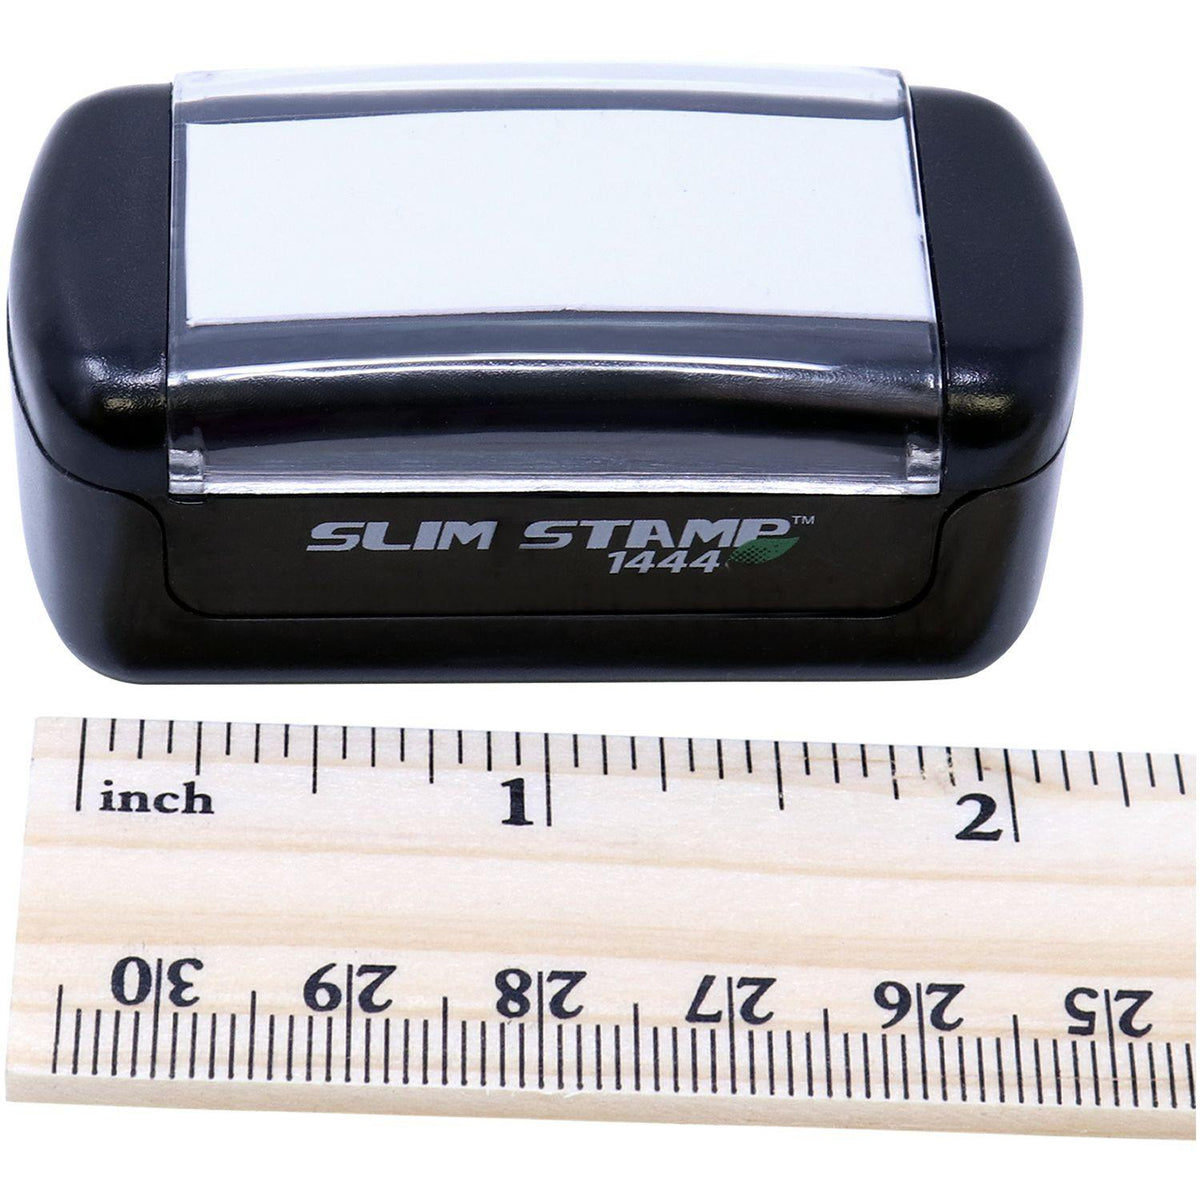 Measurement Slim Pre-Inked Express Mail International Stamp with Ruler